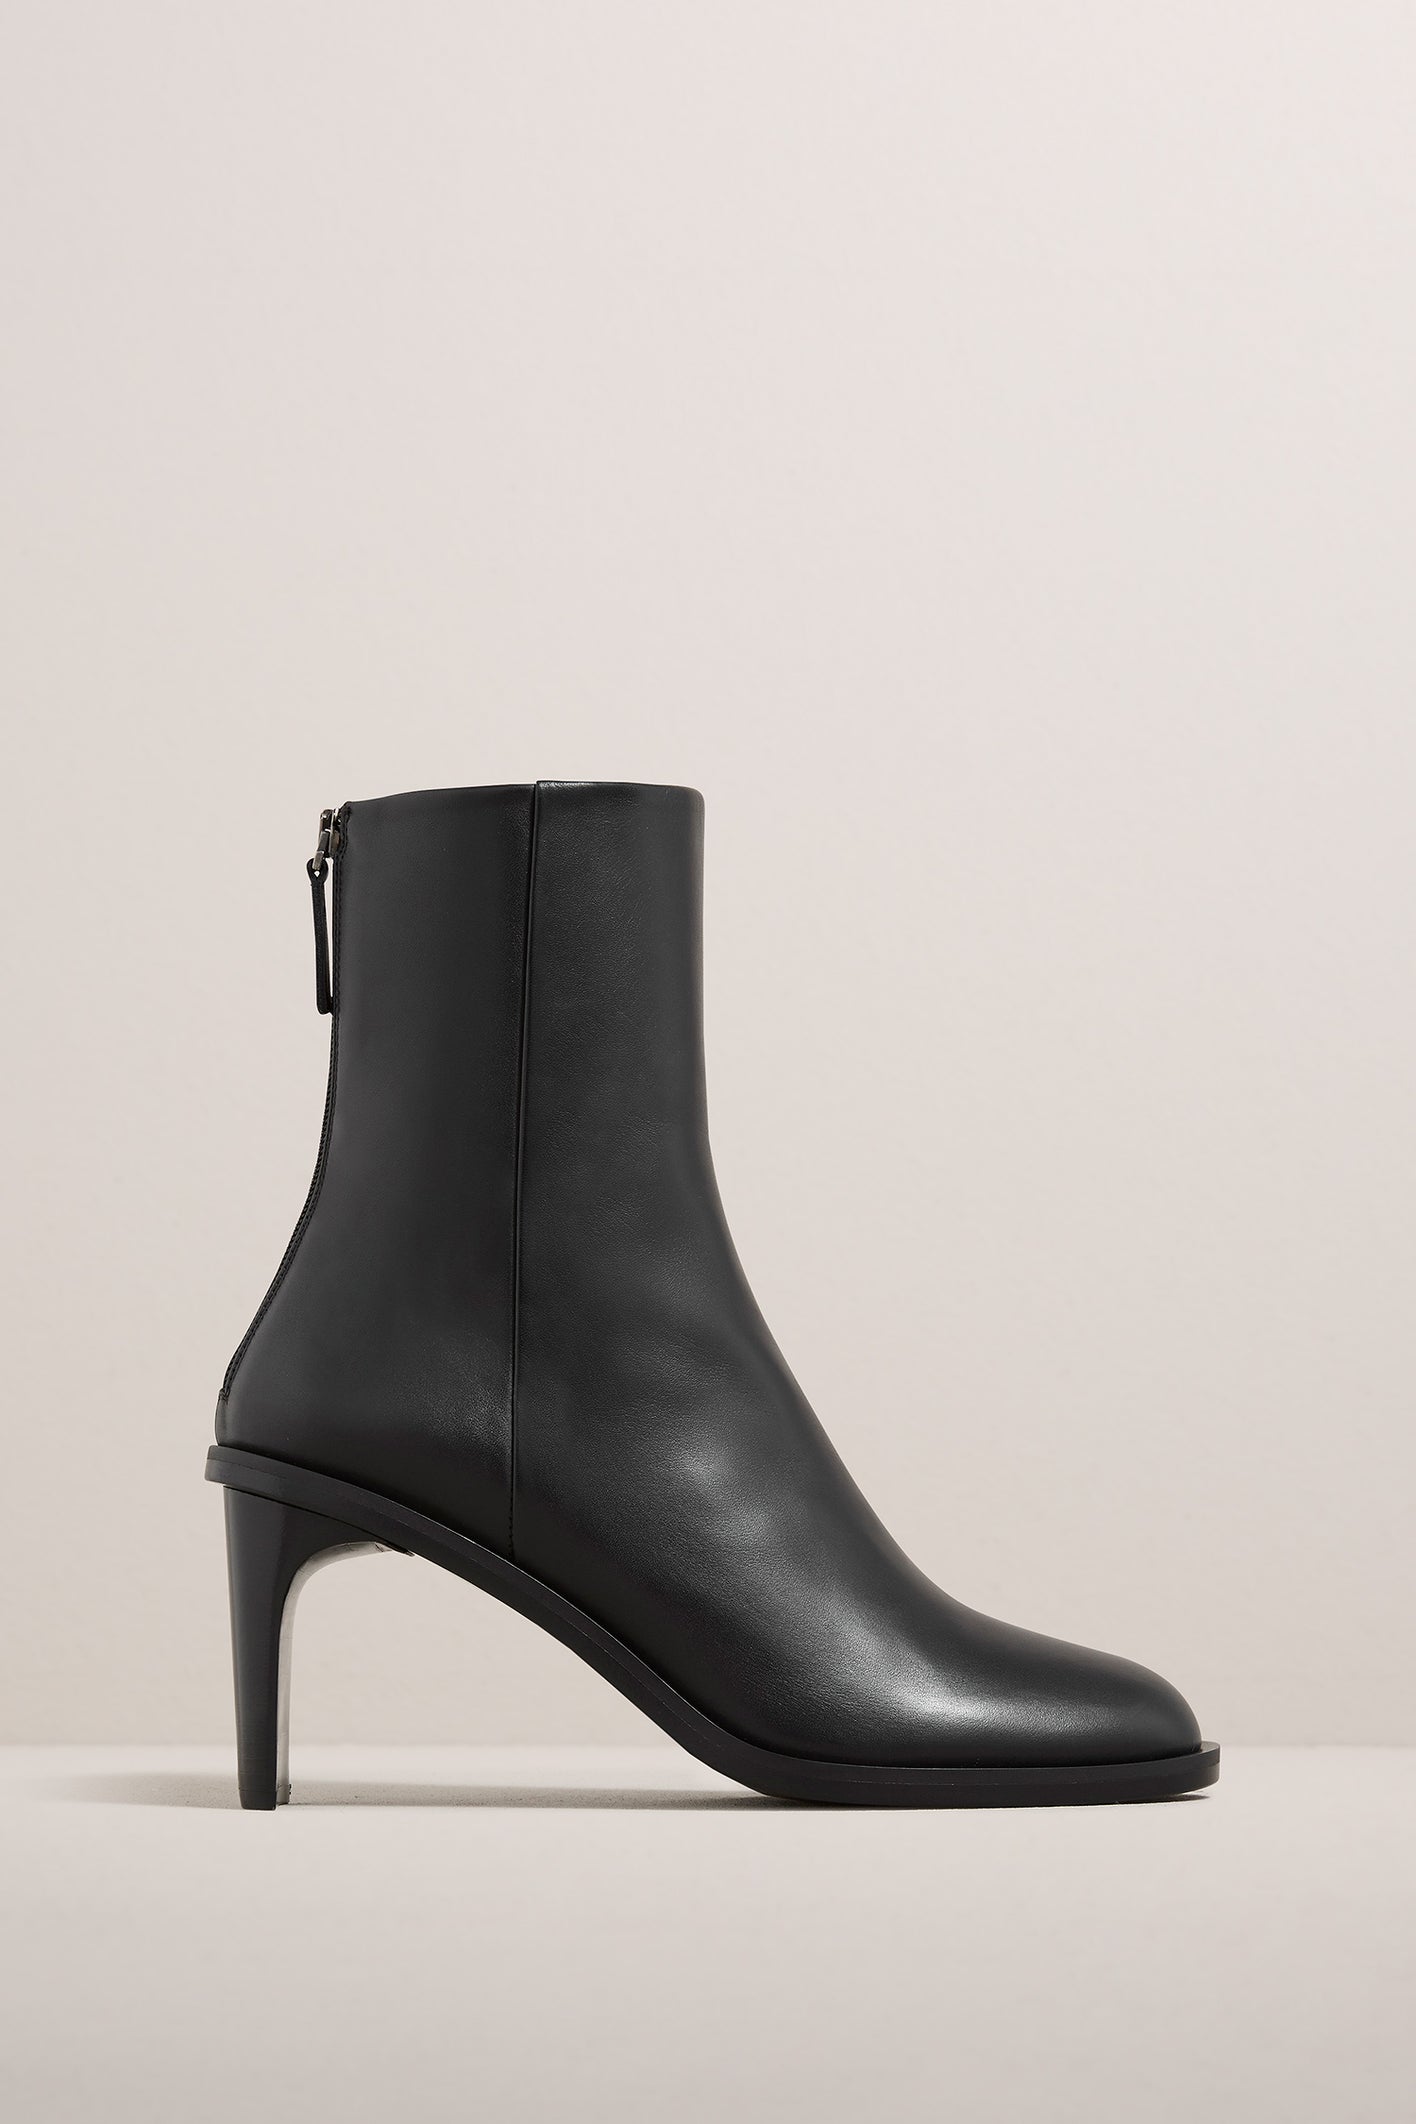 The Florence Boot